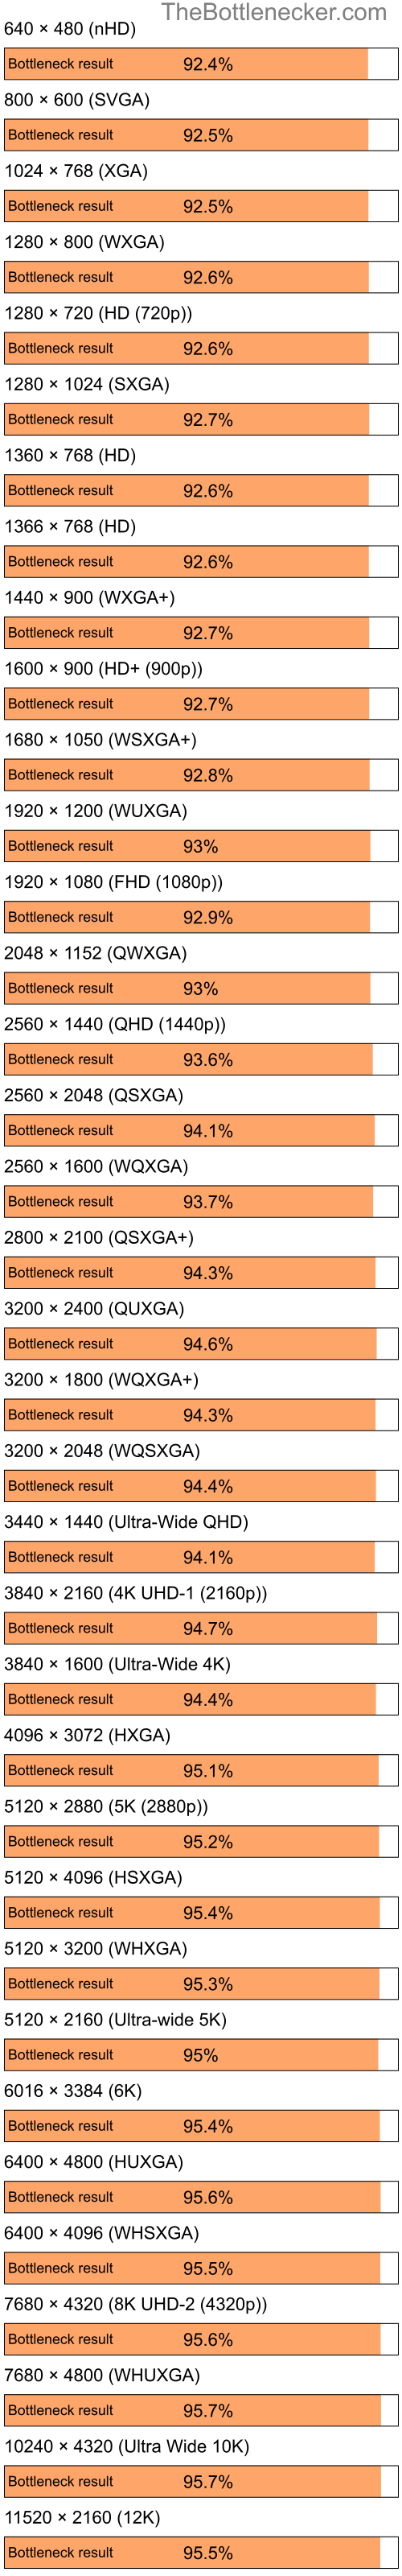 Bottleneck results by resolution for Intel Pentium 4 and NVIDIA GeForce2 GTS in Graphic Card Intense Tasks